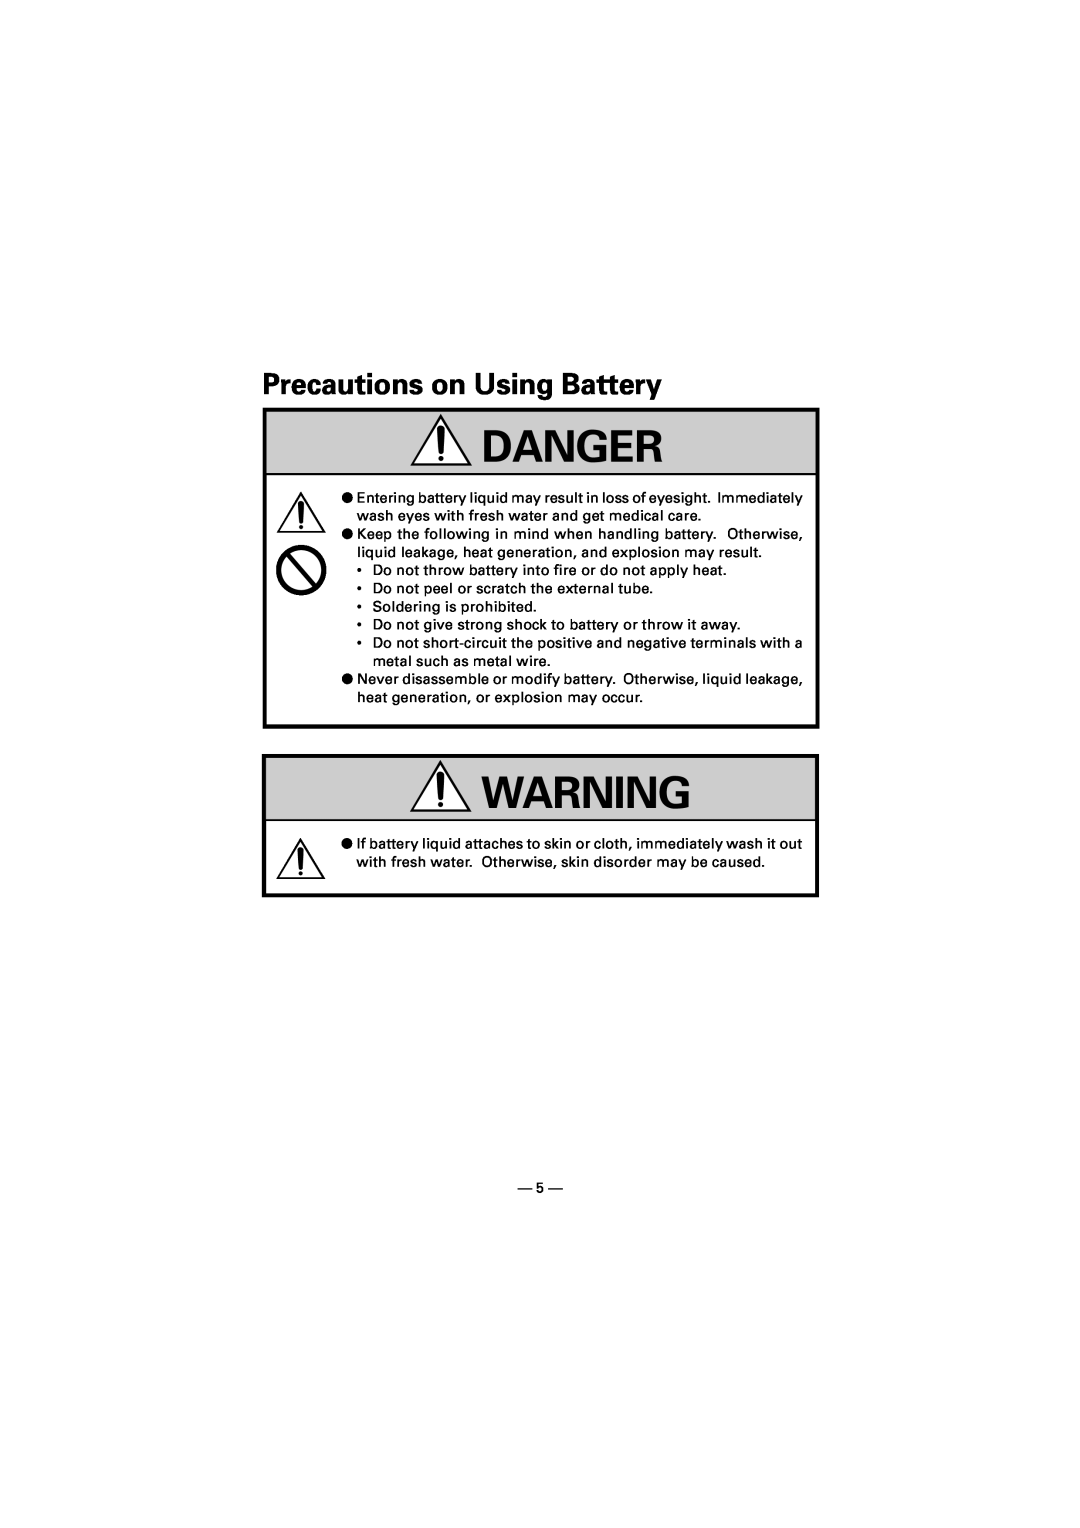 Citizen Systems CMP-10 manual Precautions on Using Battery, Danger 